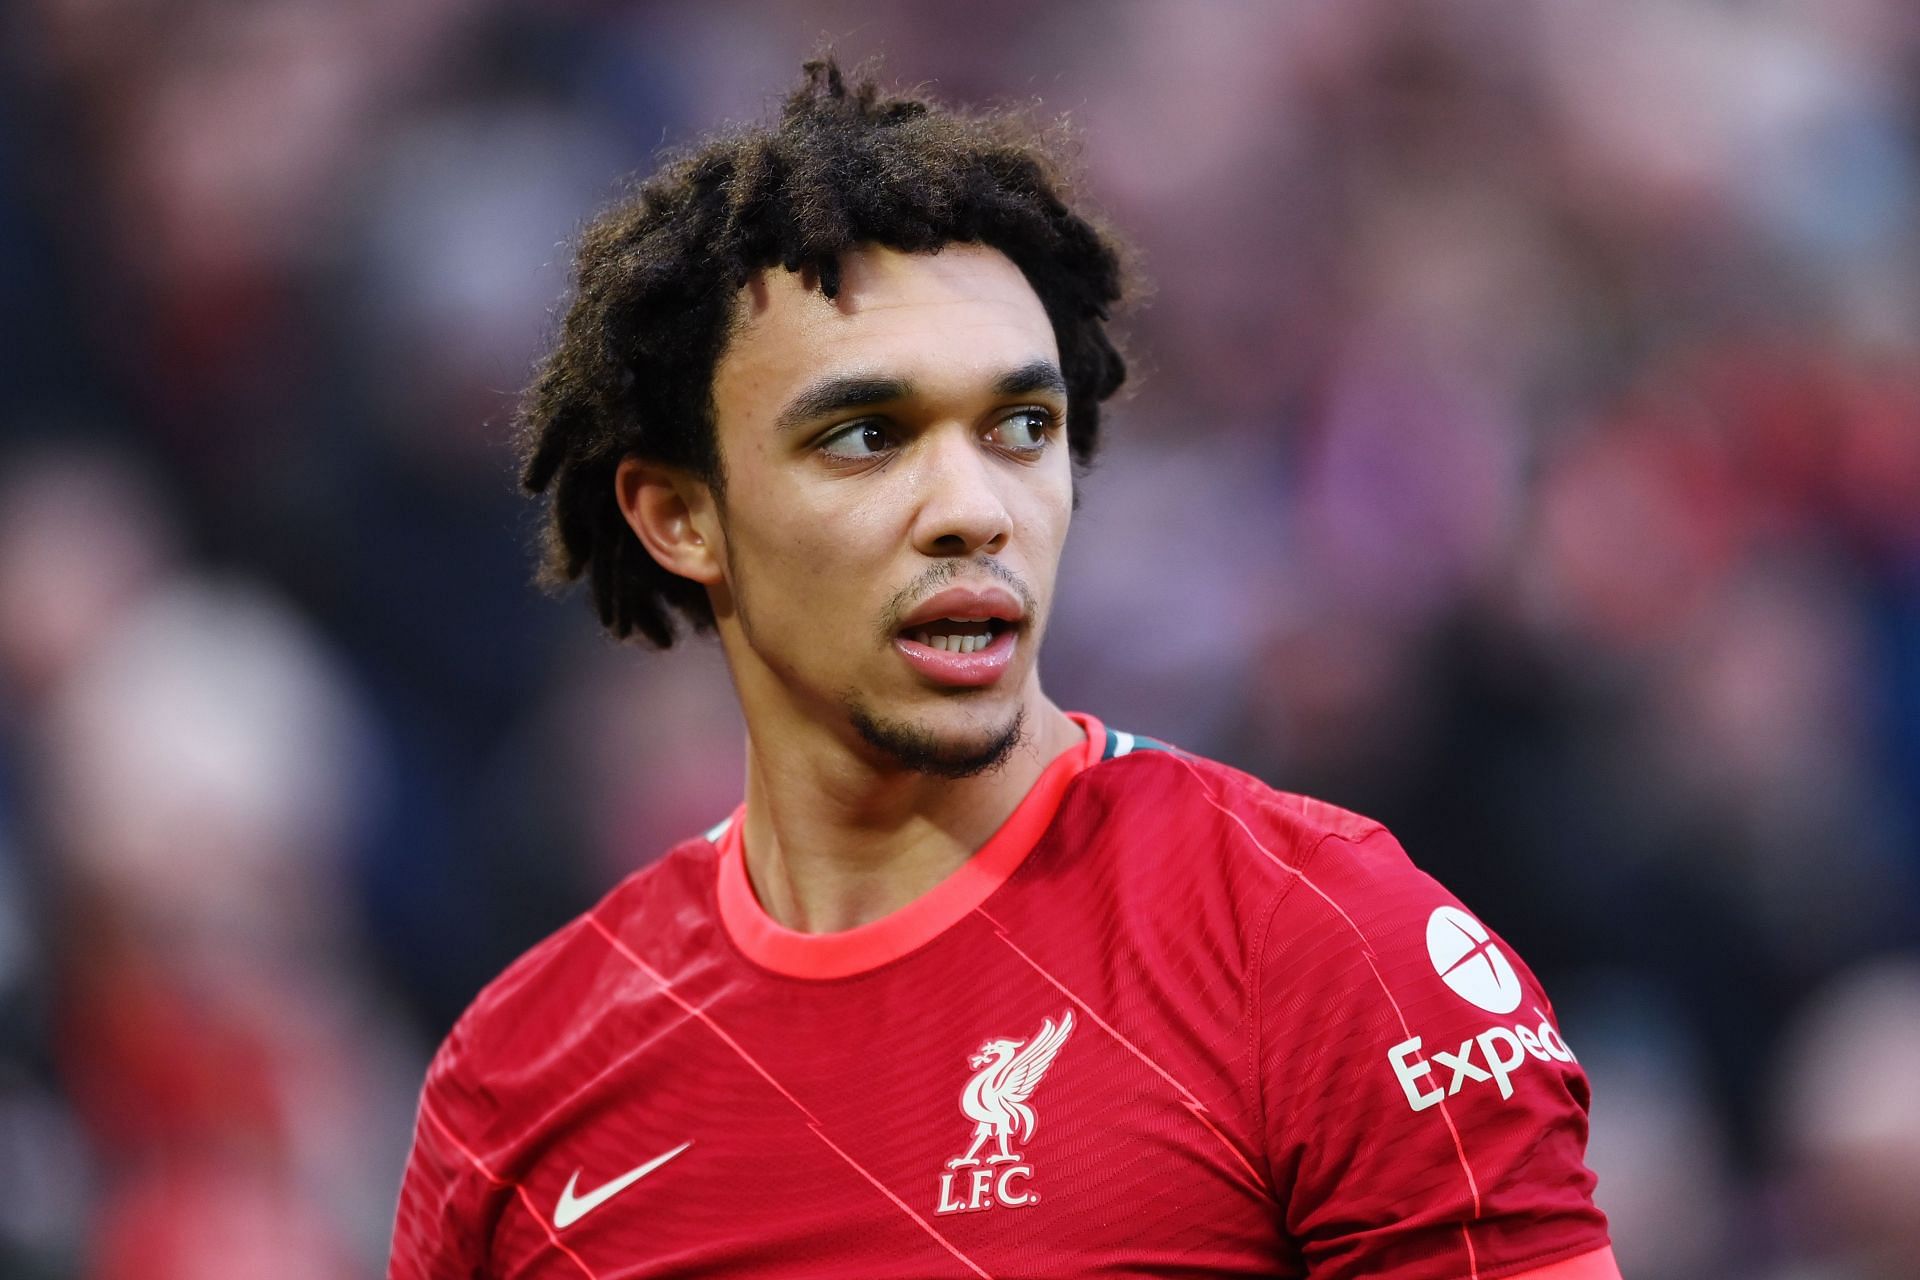 Trent Alexander-Arnold is one of the most valuable Liverpool players.